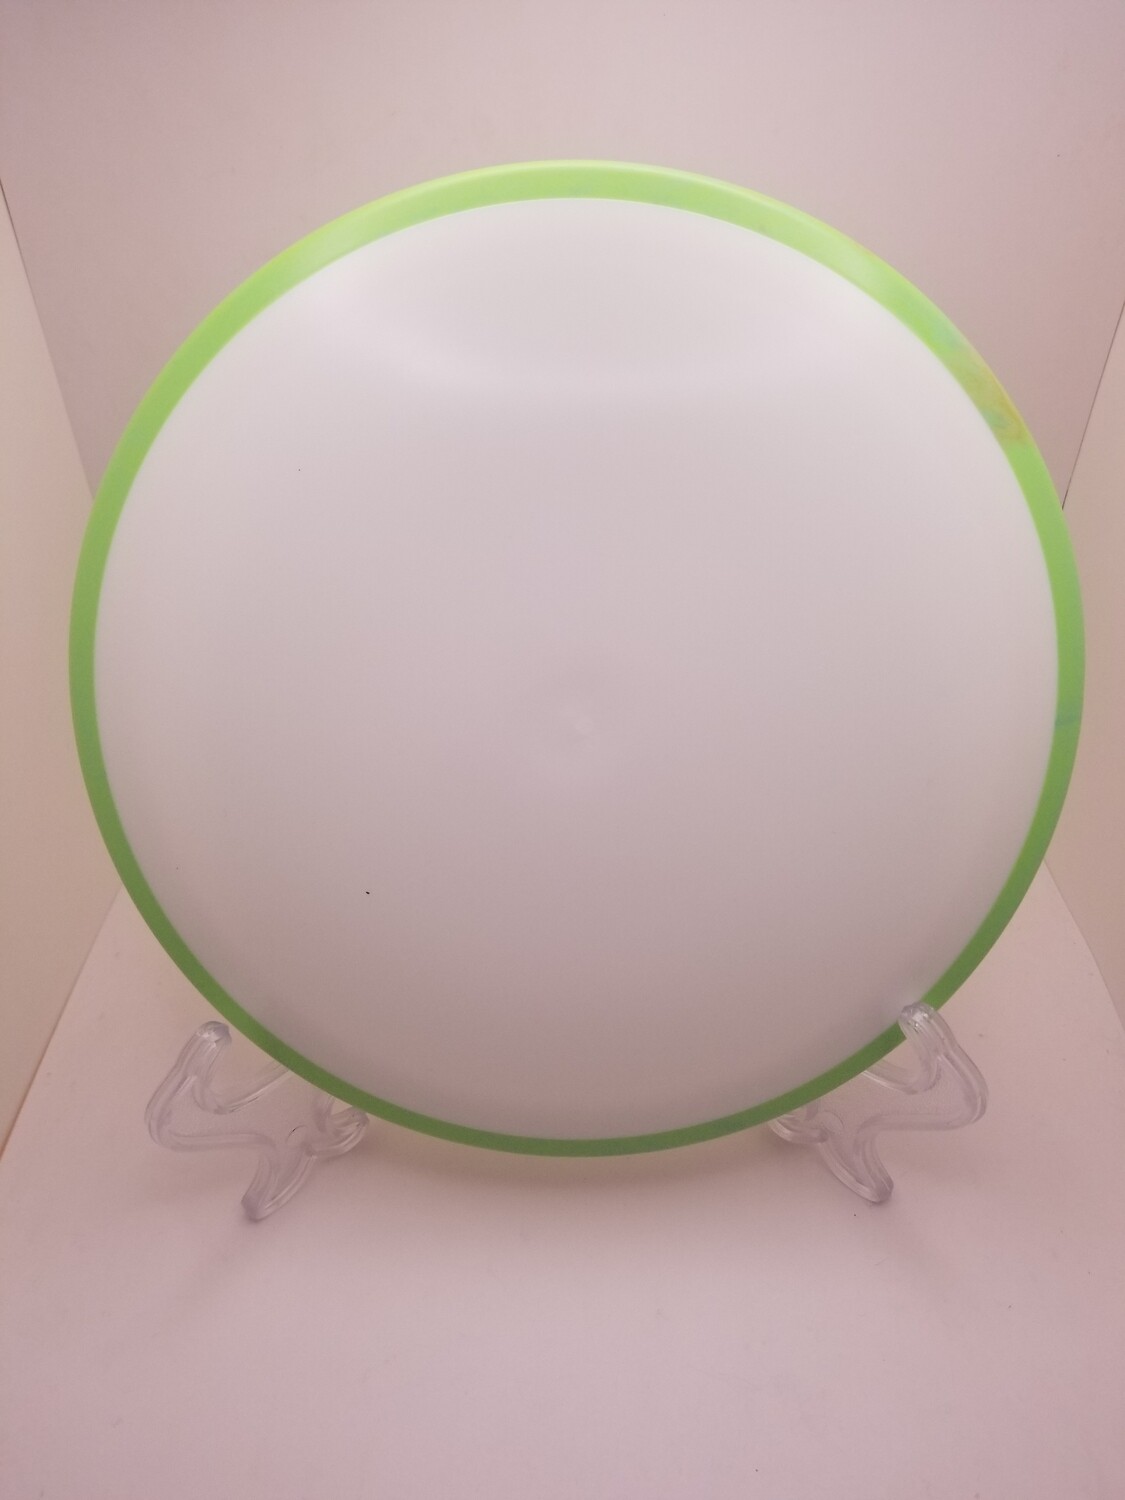 Dyer's Delight - Axiom Discs Crave White with Green swirly Rim Fission 165-169 g